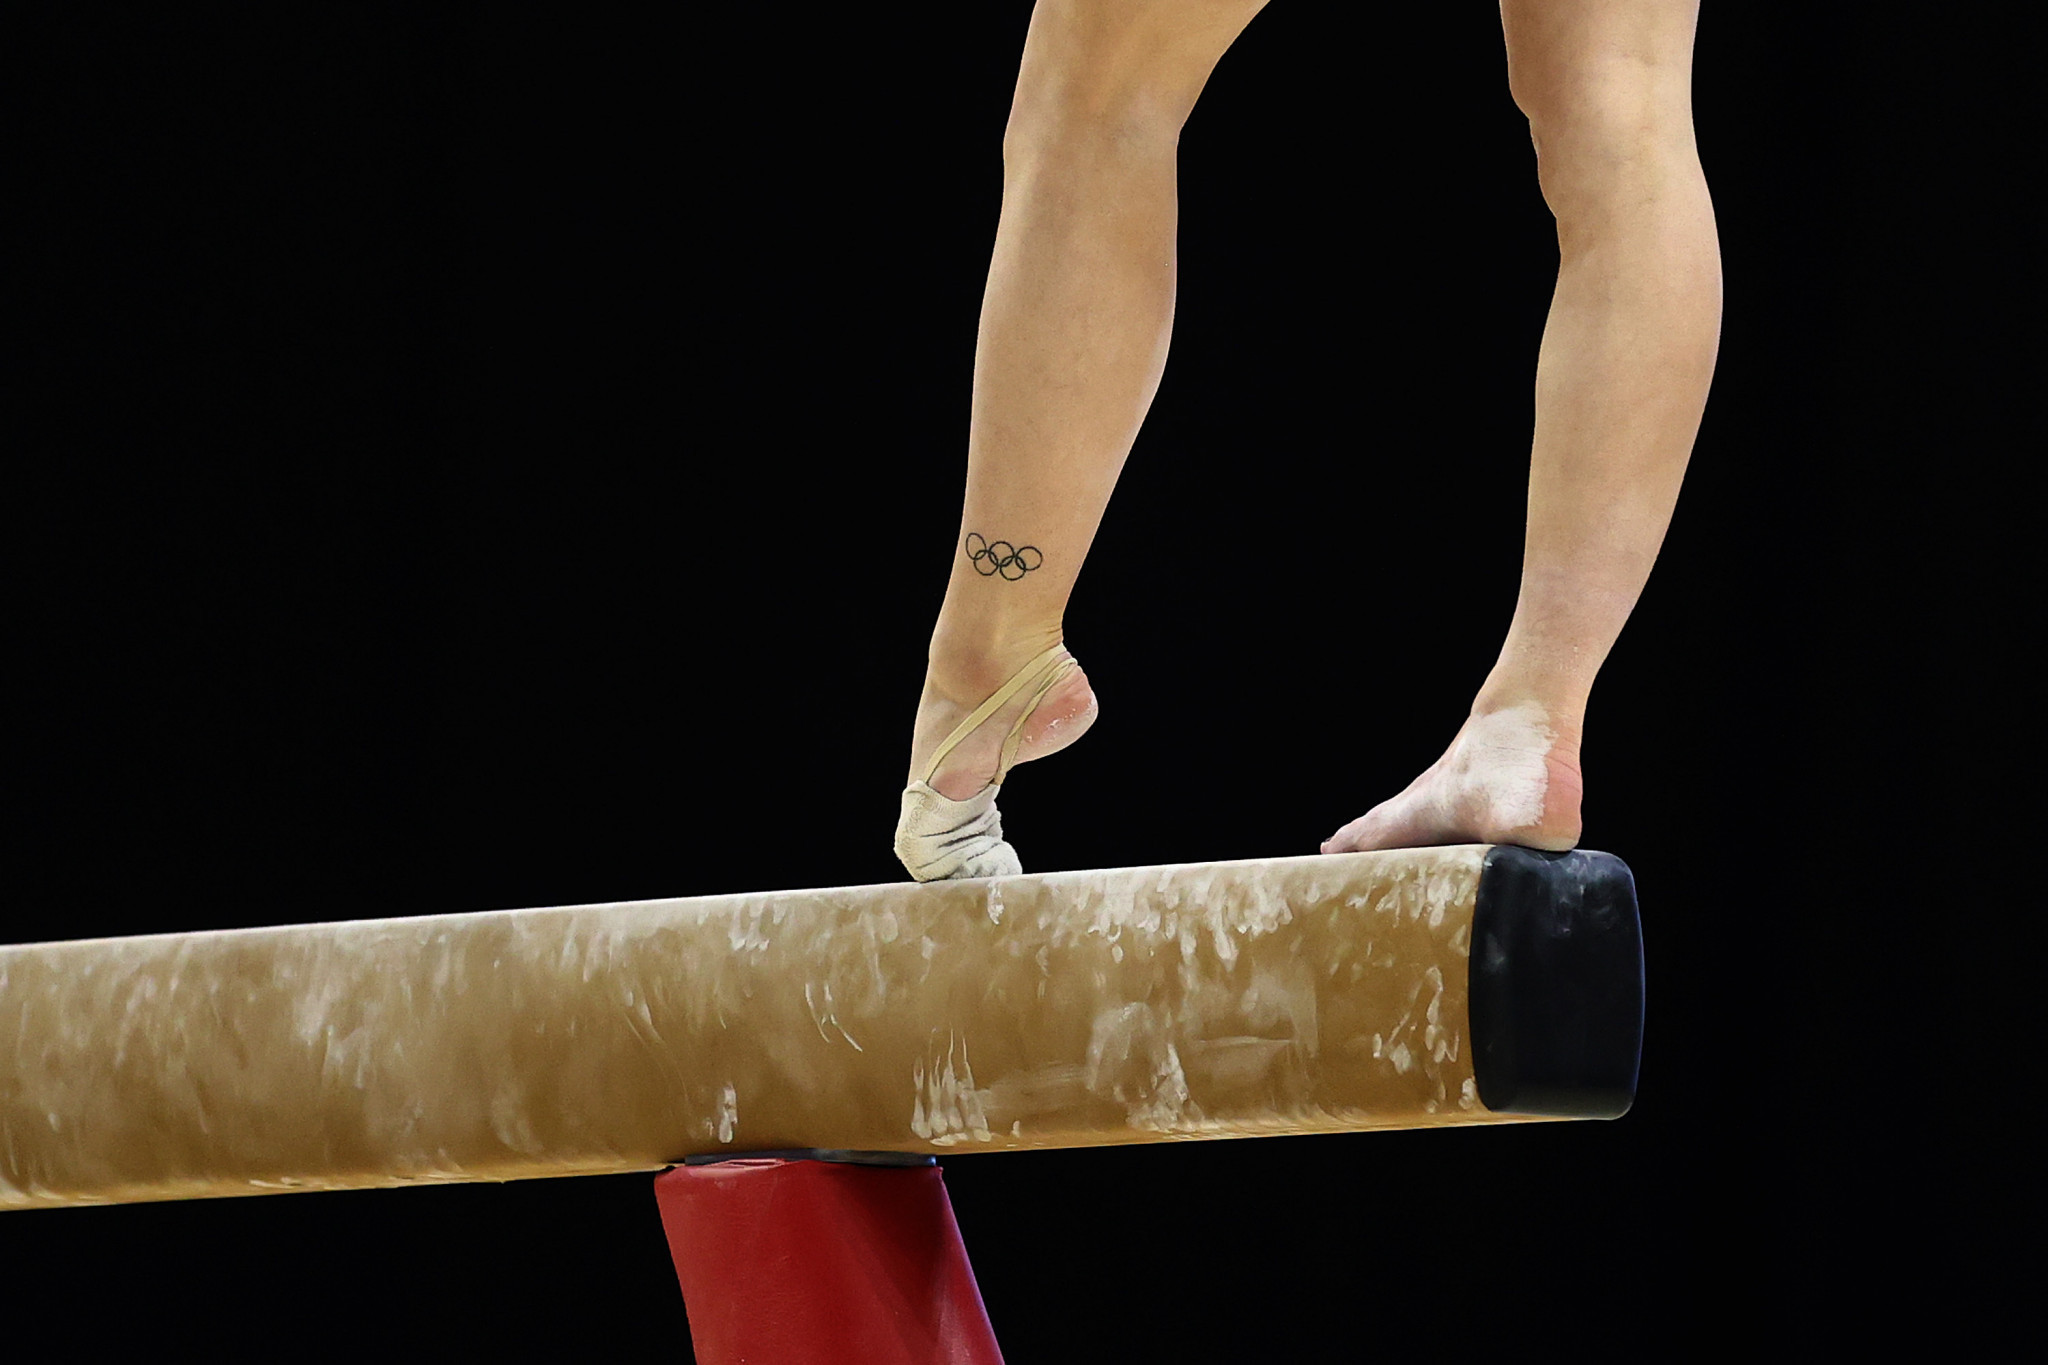 The International Gymnastics Federation has announced changes to its Statutes during its Congress in Turkey ©Getty Images